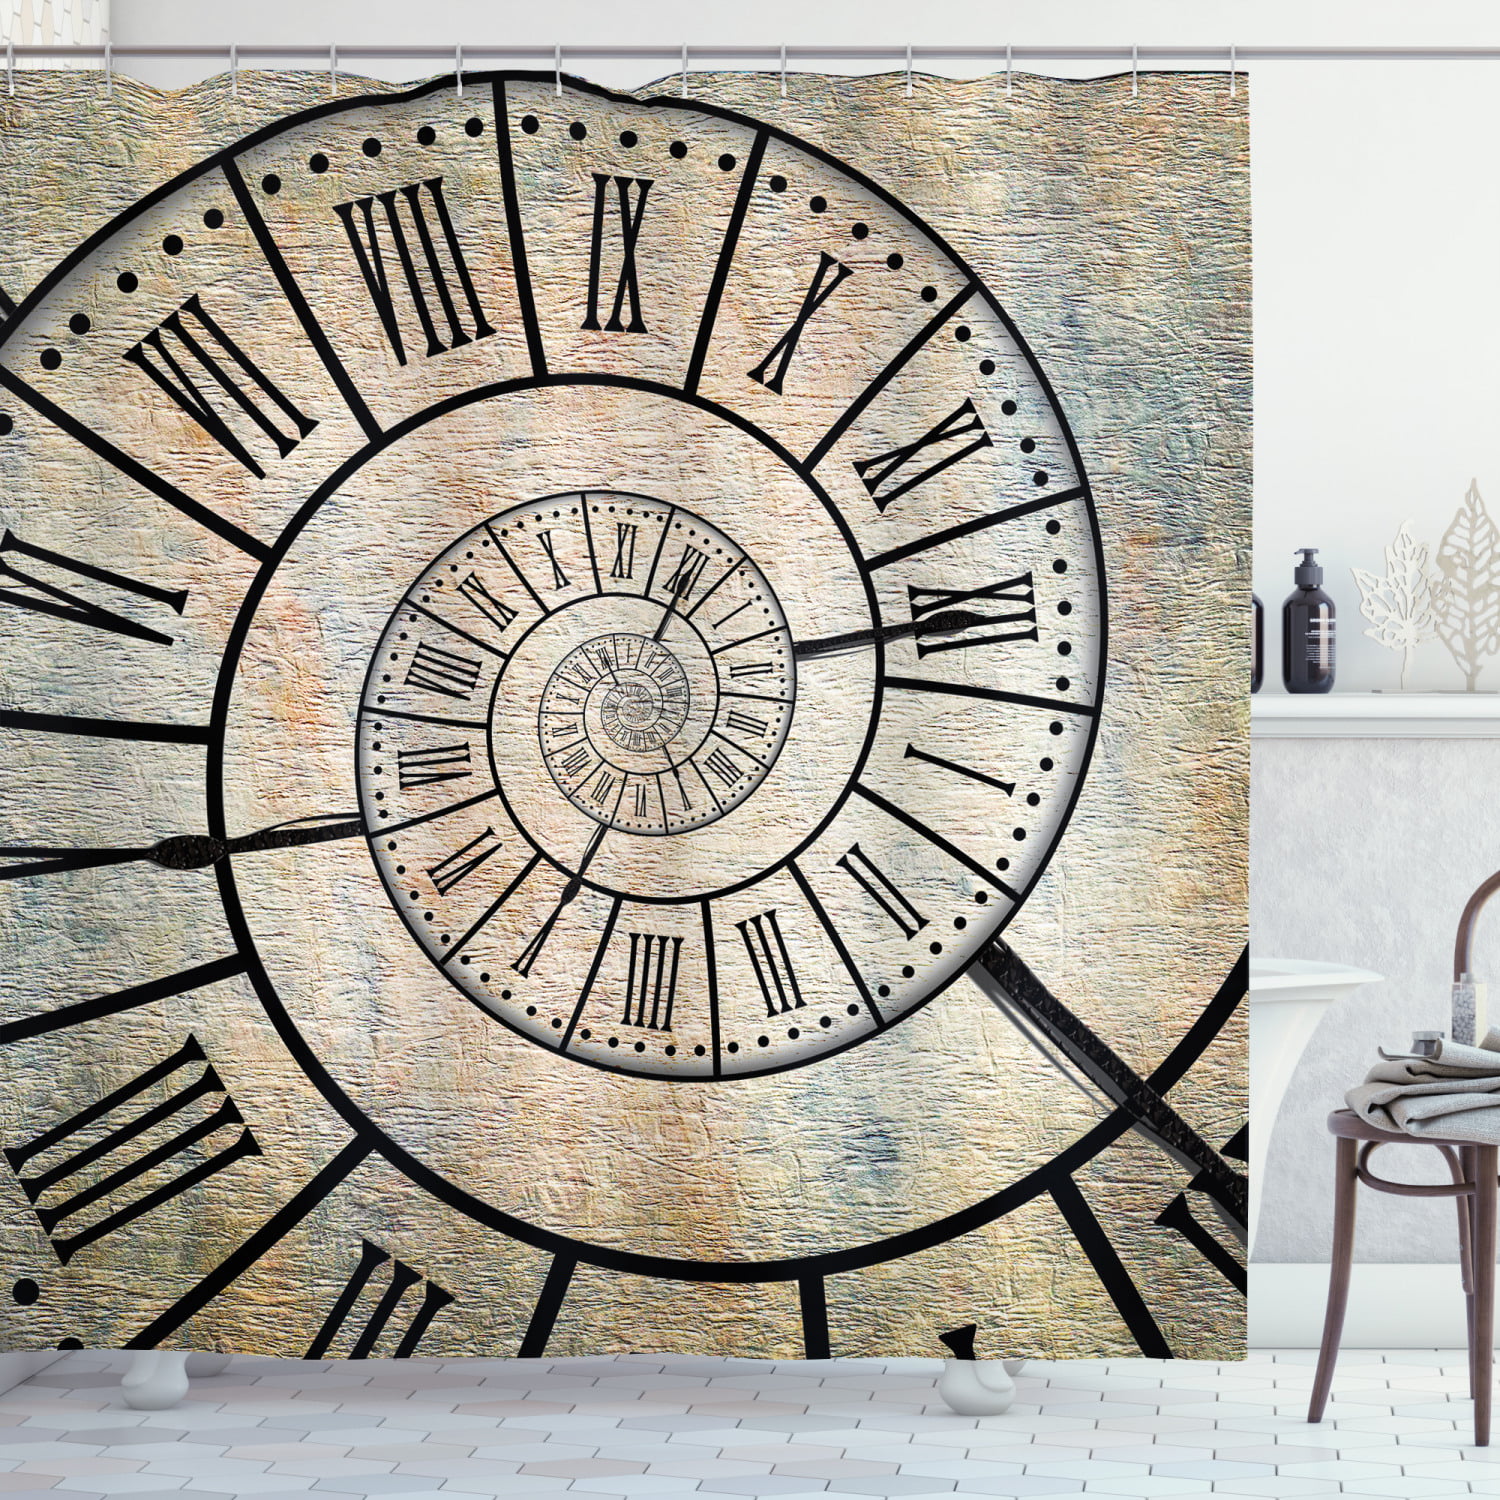 Clock Shower Curtain, A Roman Digit Time Spiral on the Vintage Textured ...